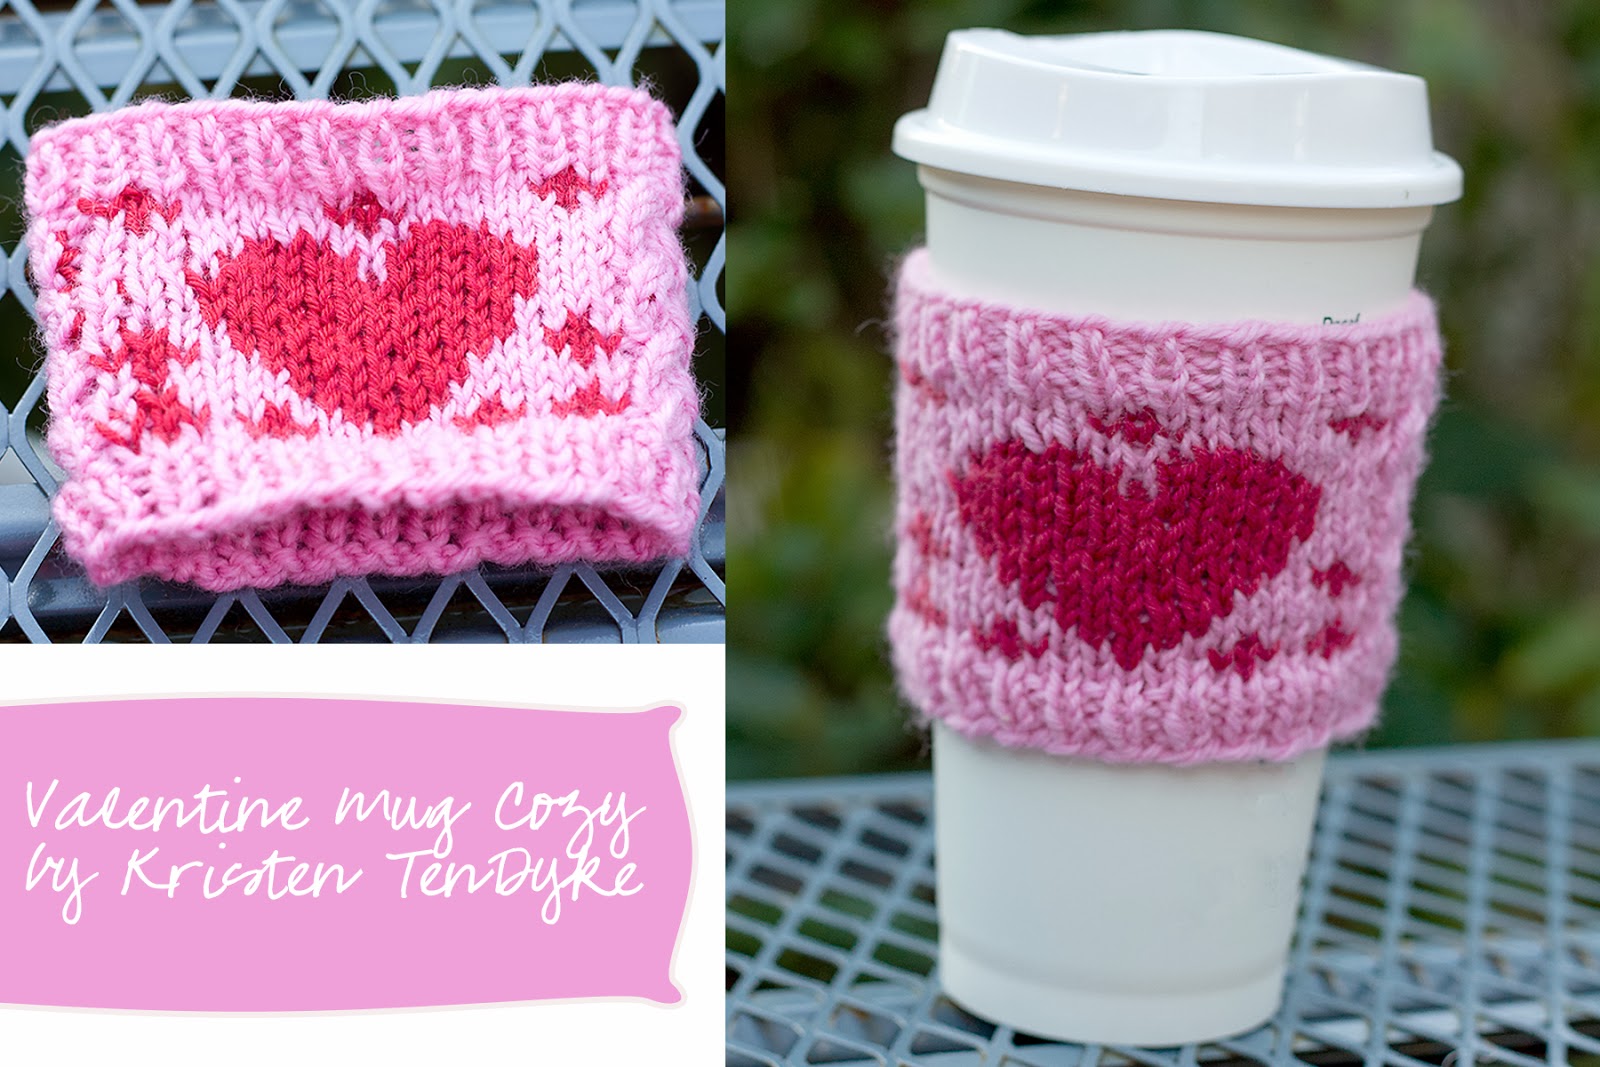 Click to see this project on Ravelry!